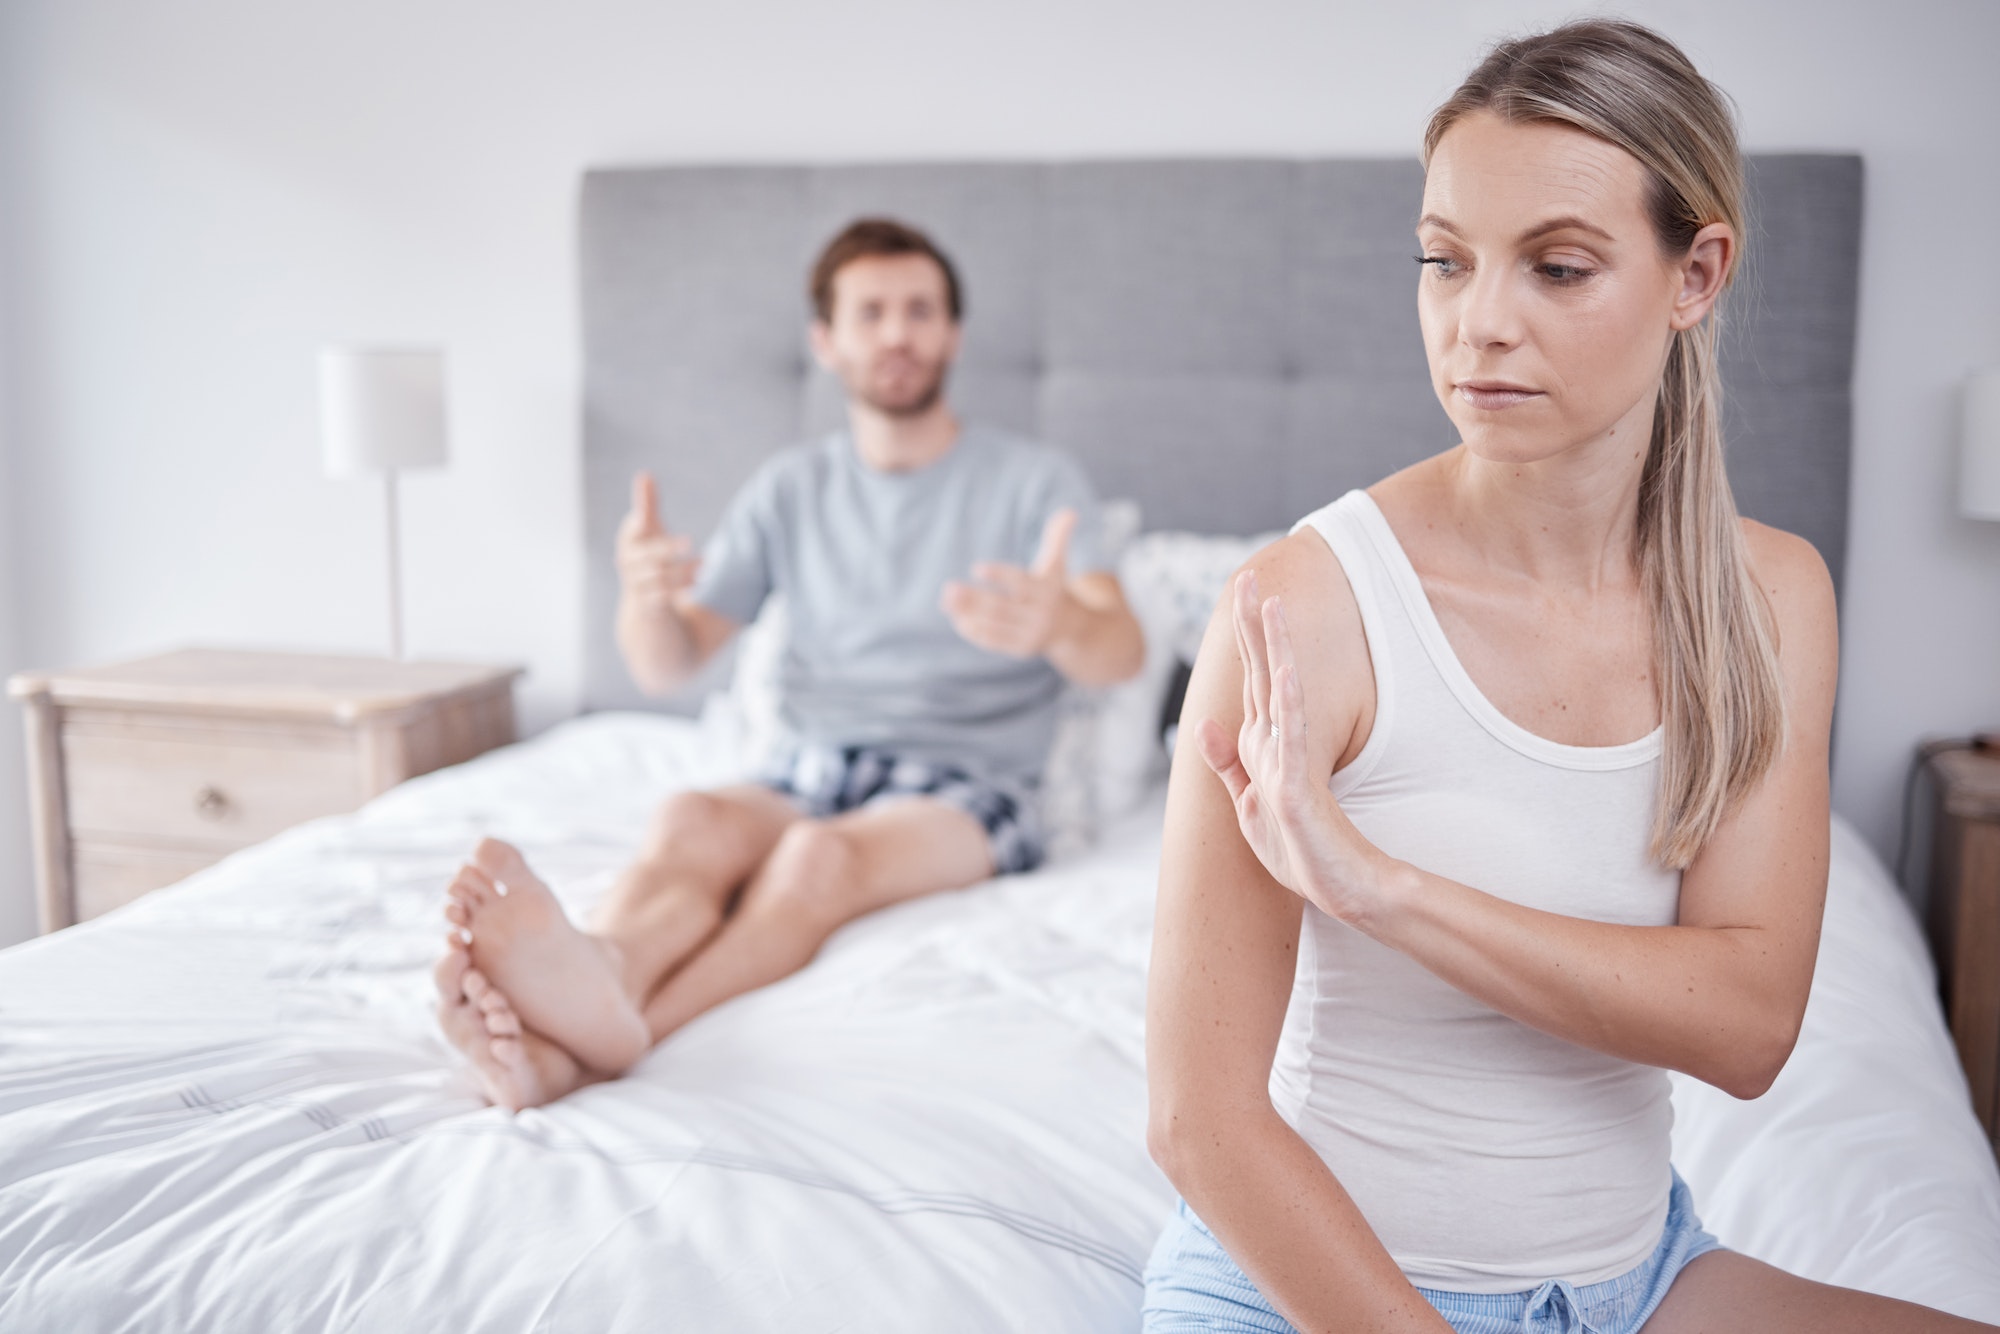 mental health, stress and a couple fight in bedroom in the morning due to bad marriage. Toxic relat